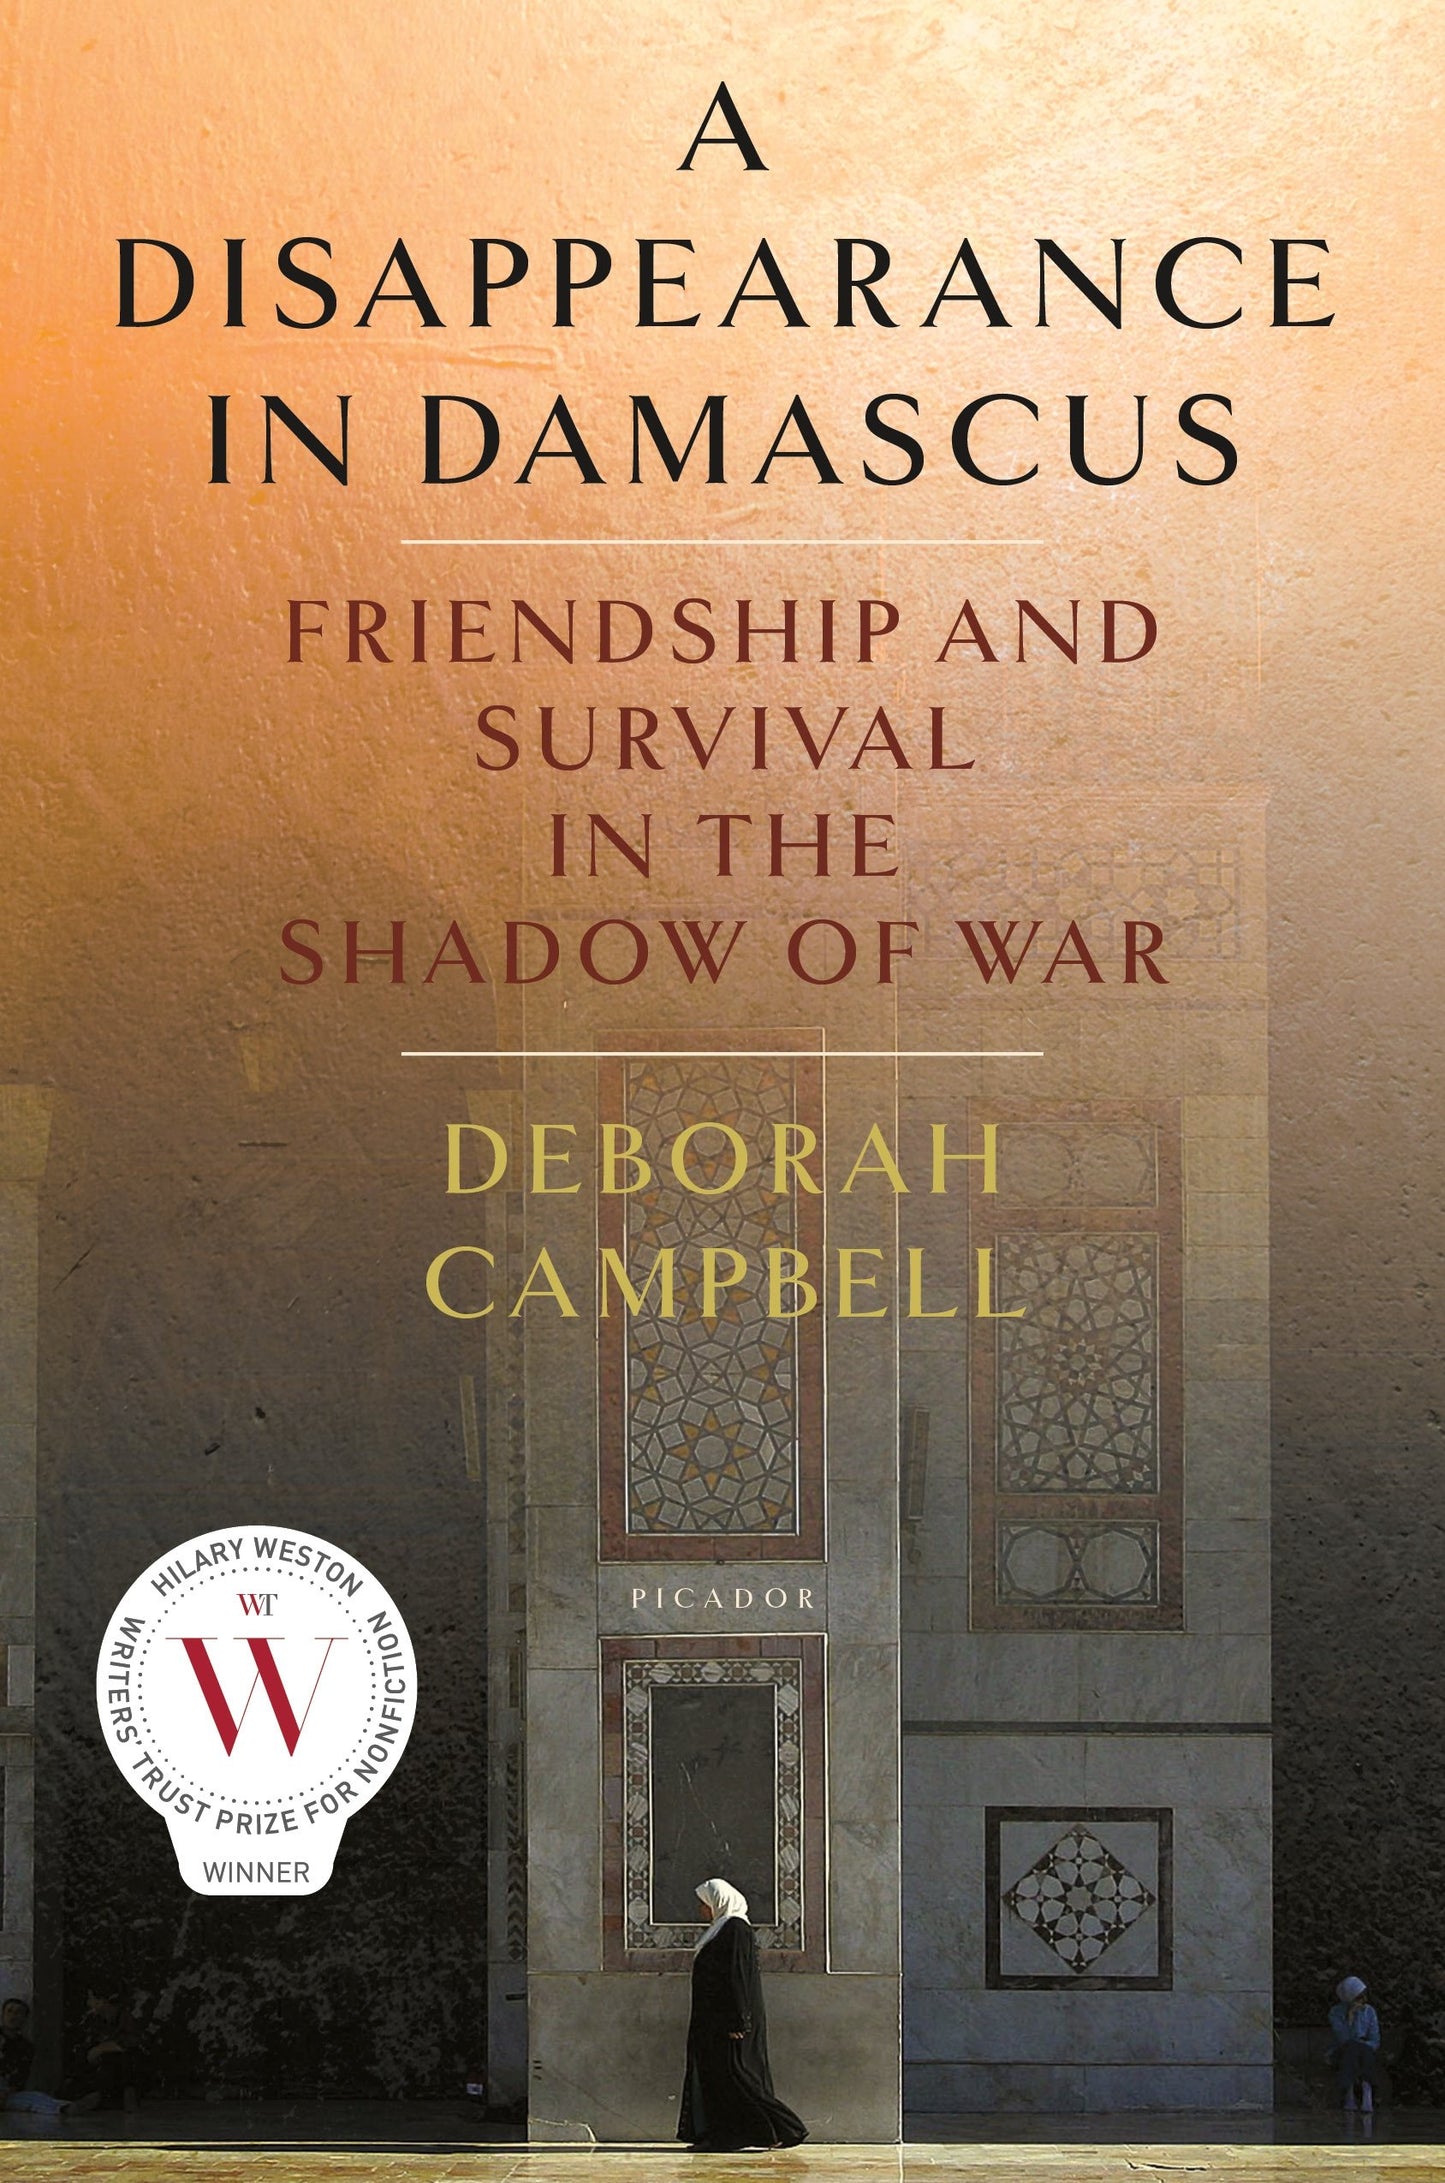 A DISAPPEARANCE IN DAMASCUS